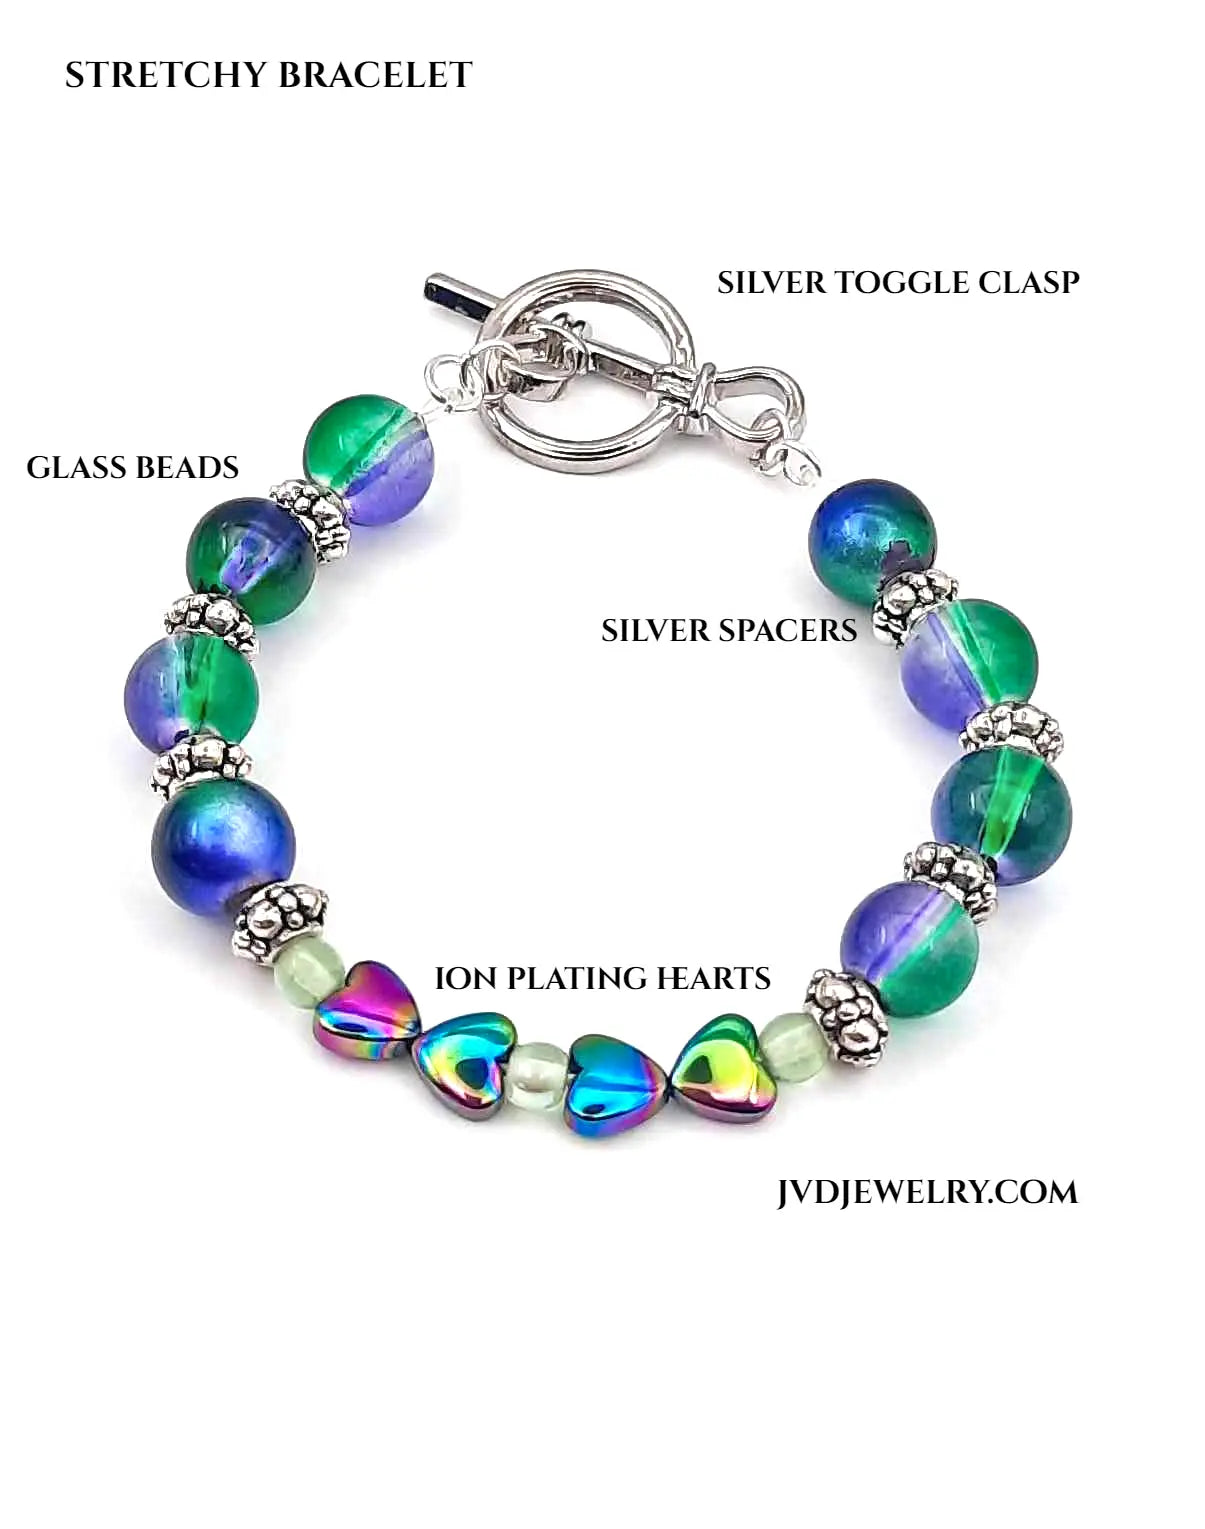 Peacock glass bead ion plating hearts bracelet - Image #2